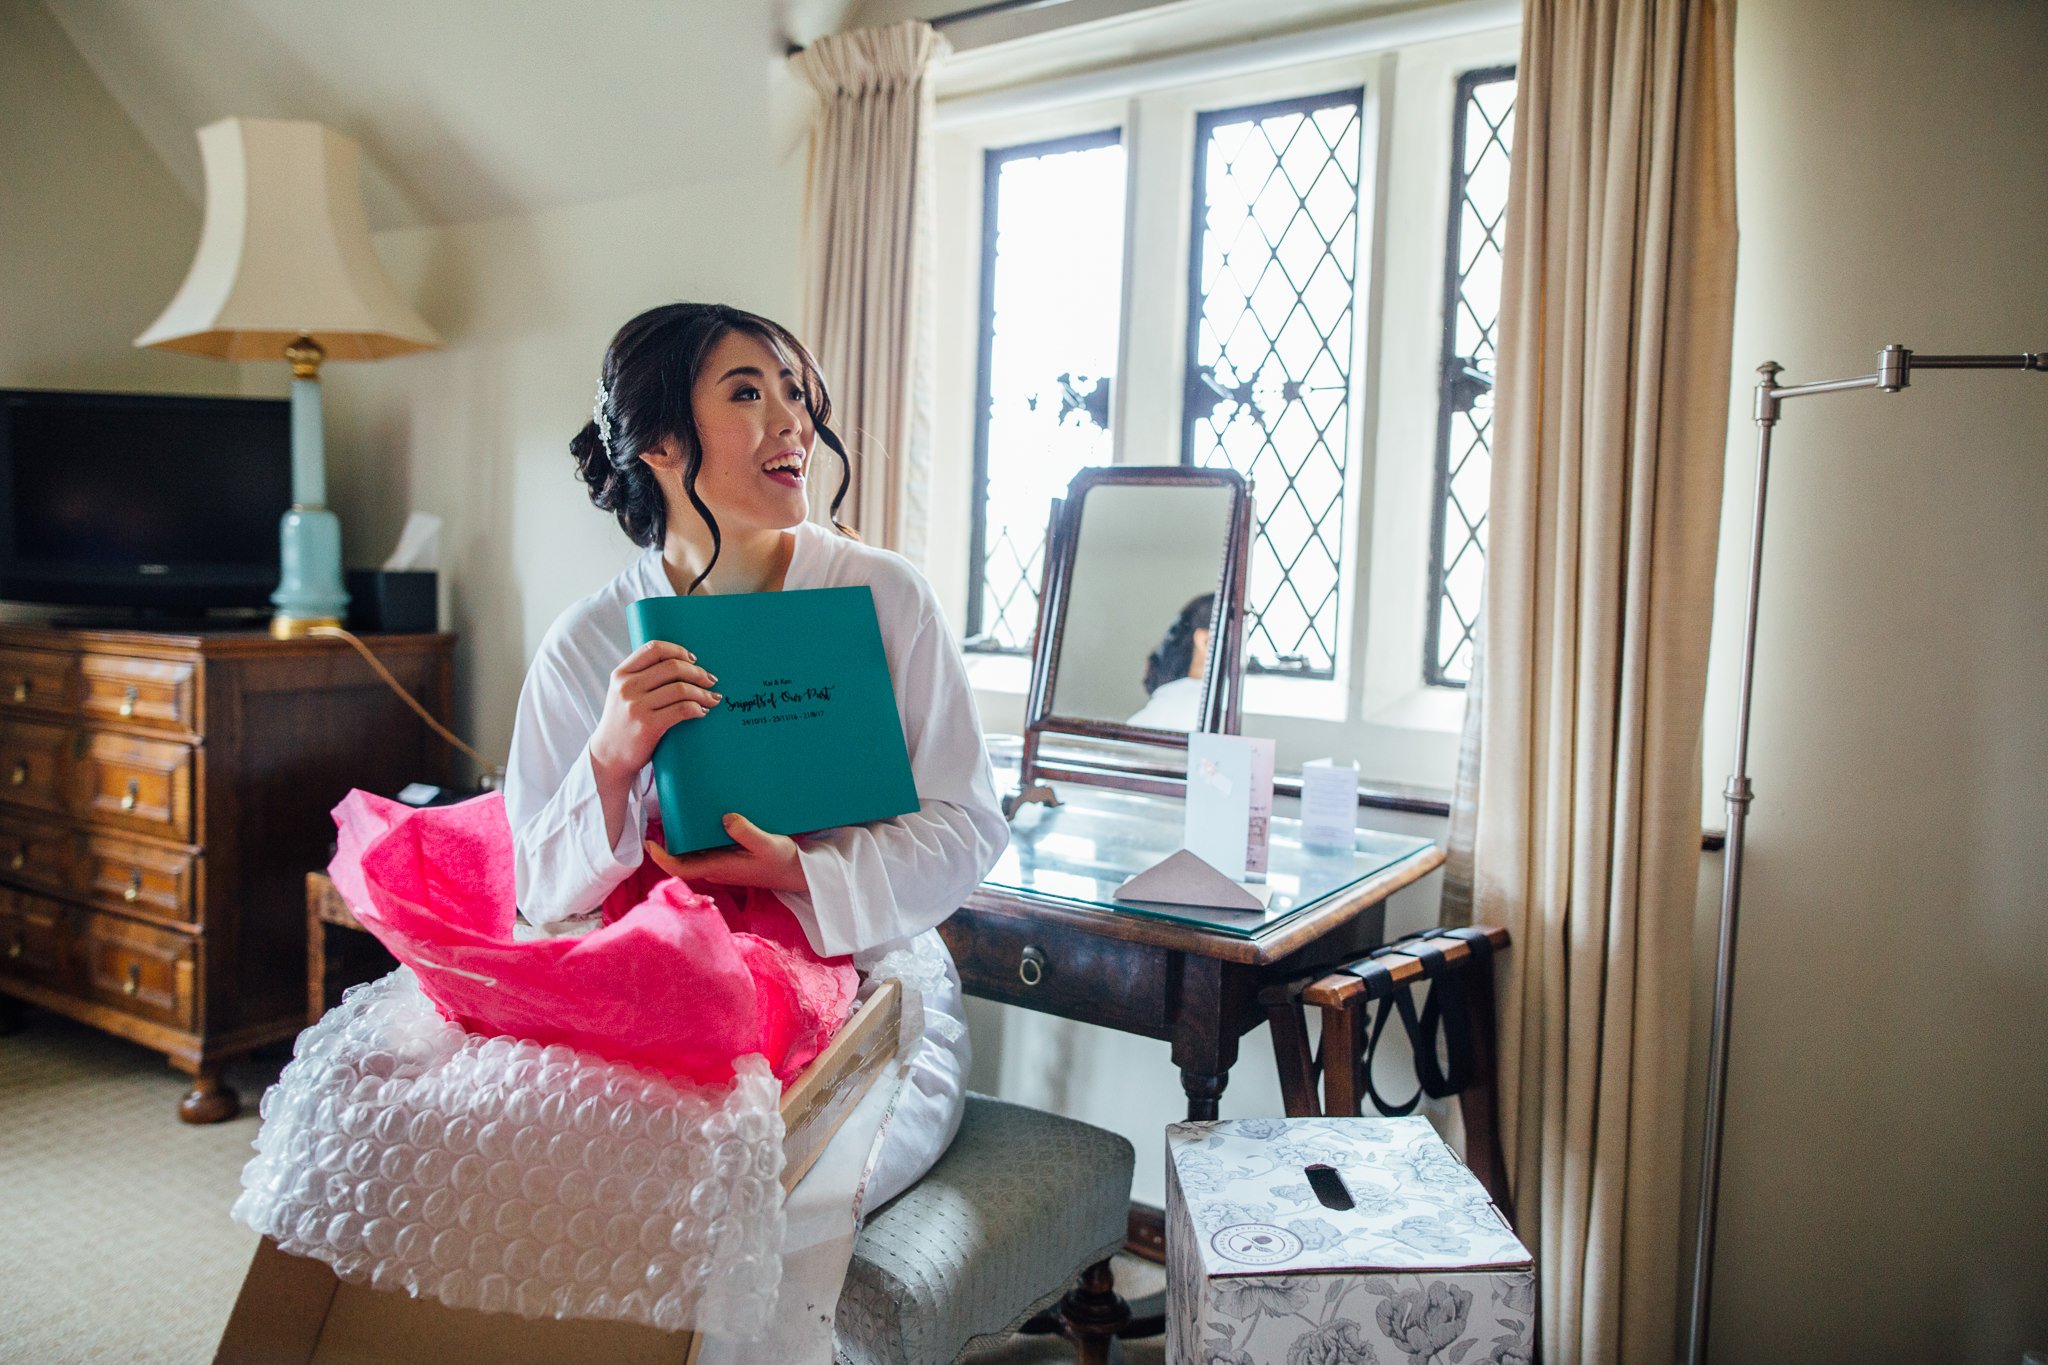  Bride receives gift from Groom on her wedding day 